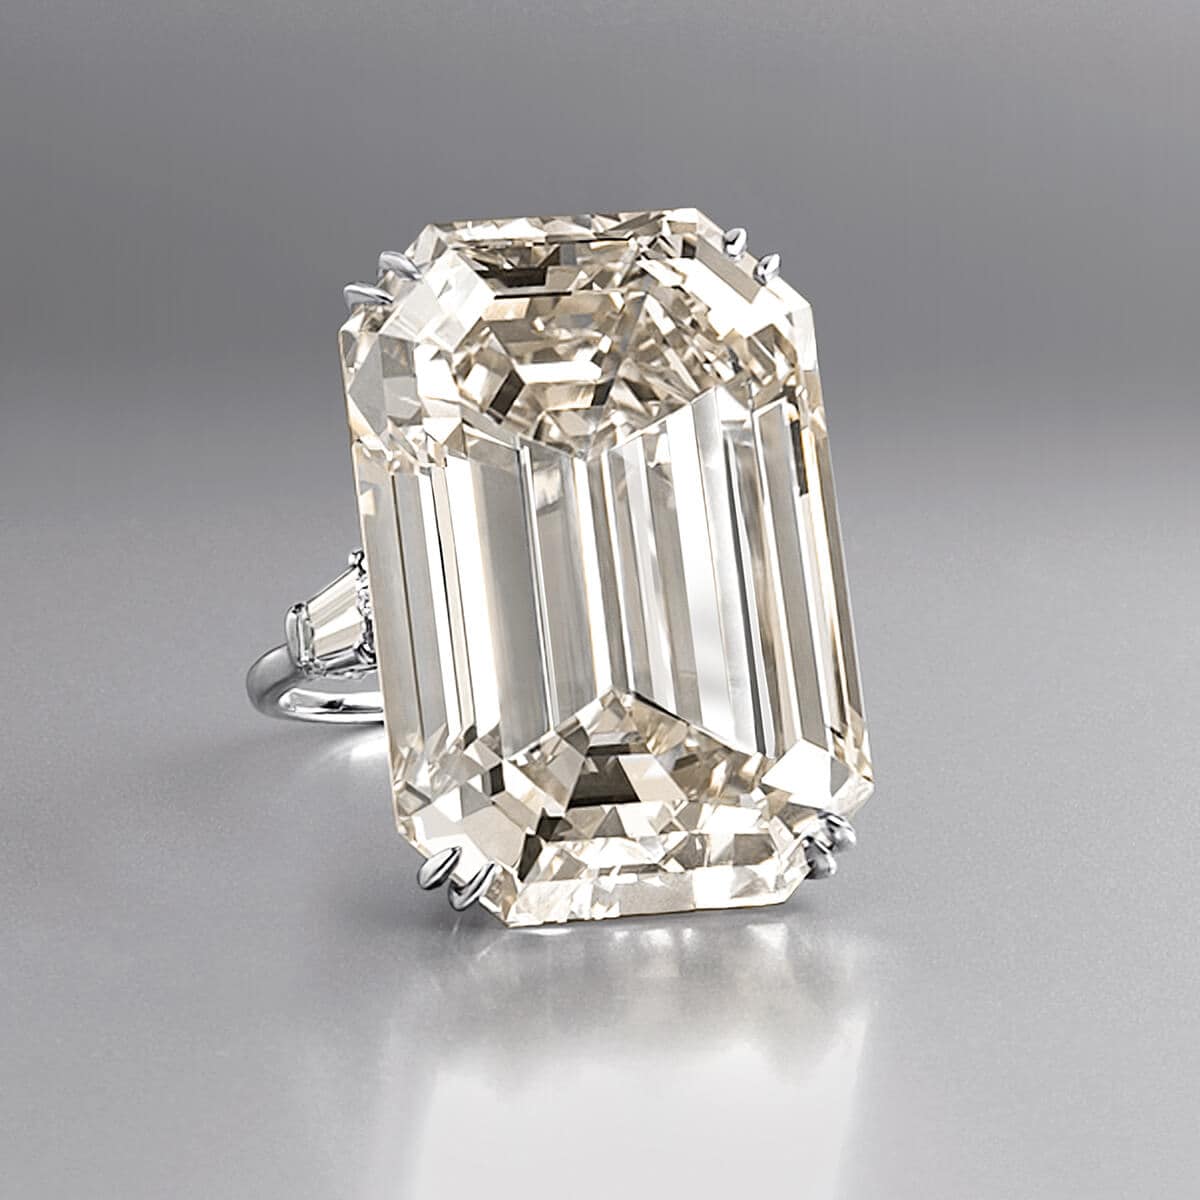 An emerald-cut diamond ring weighing 71.73 carats created from the Lesotho rough diamond